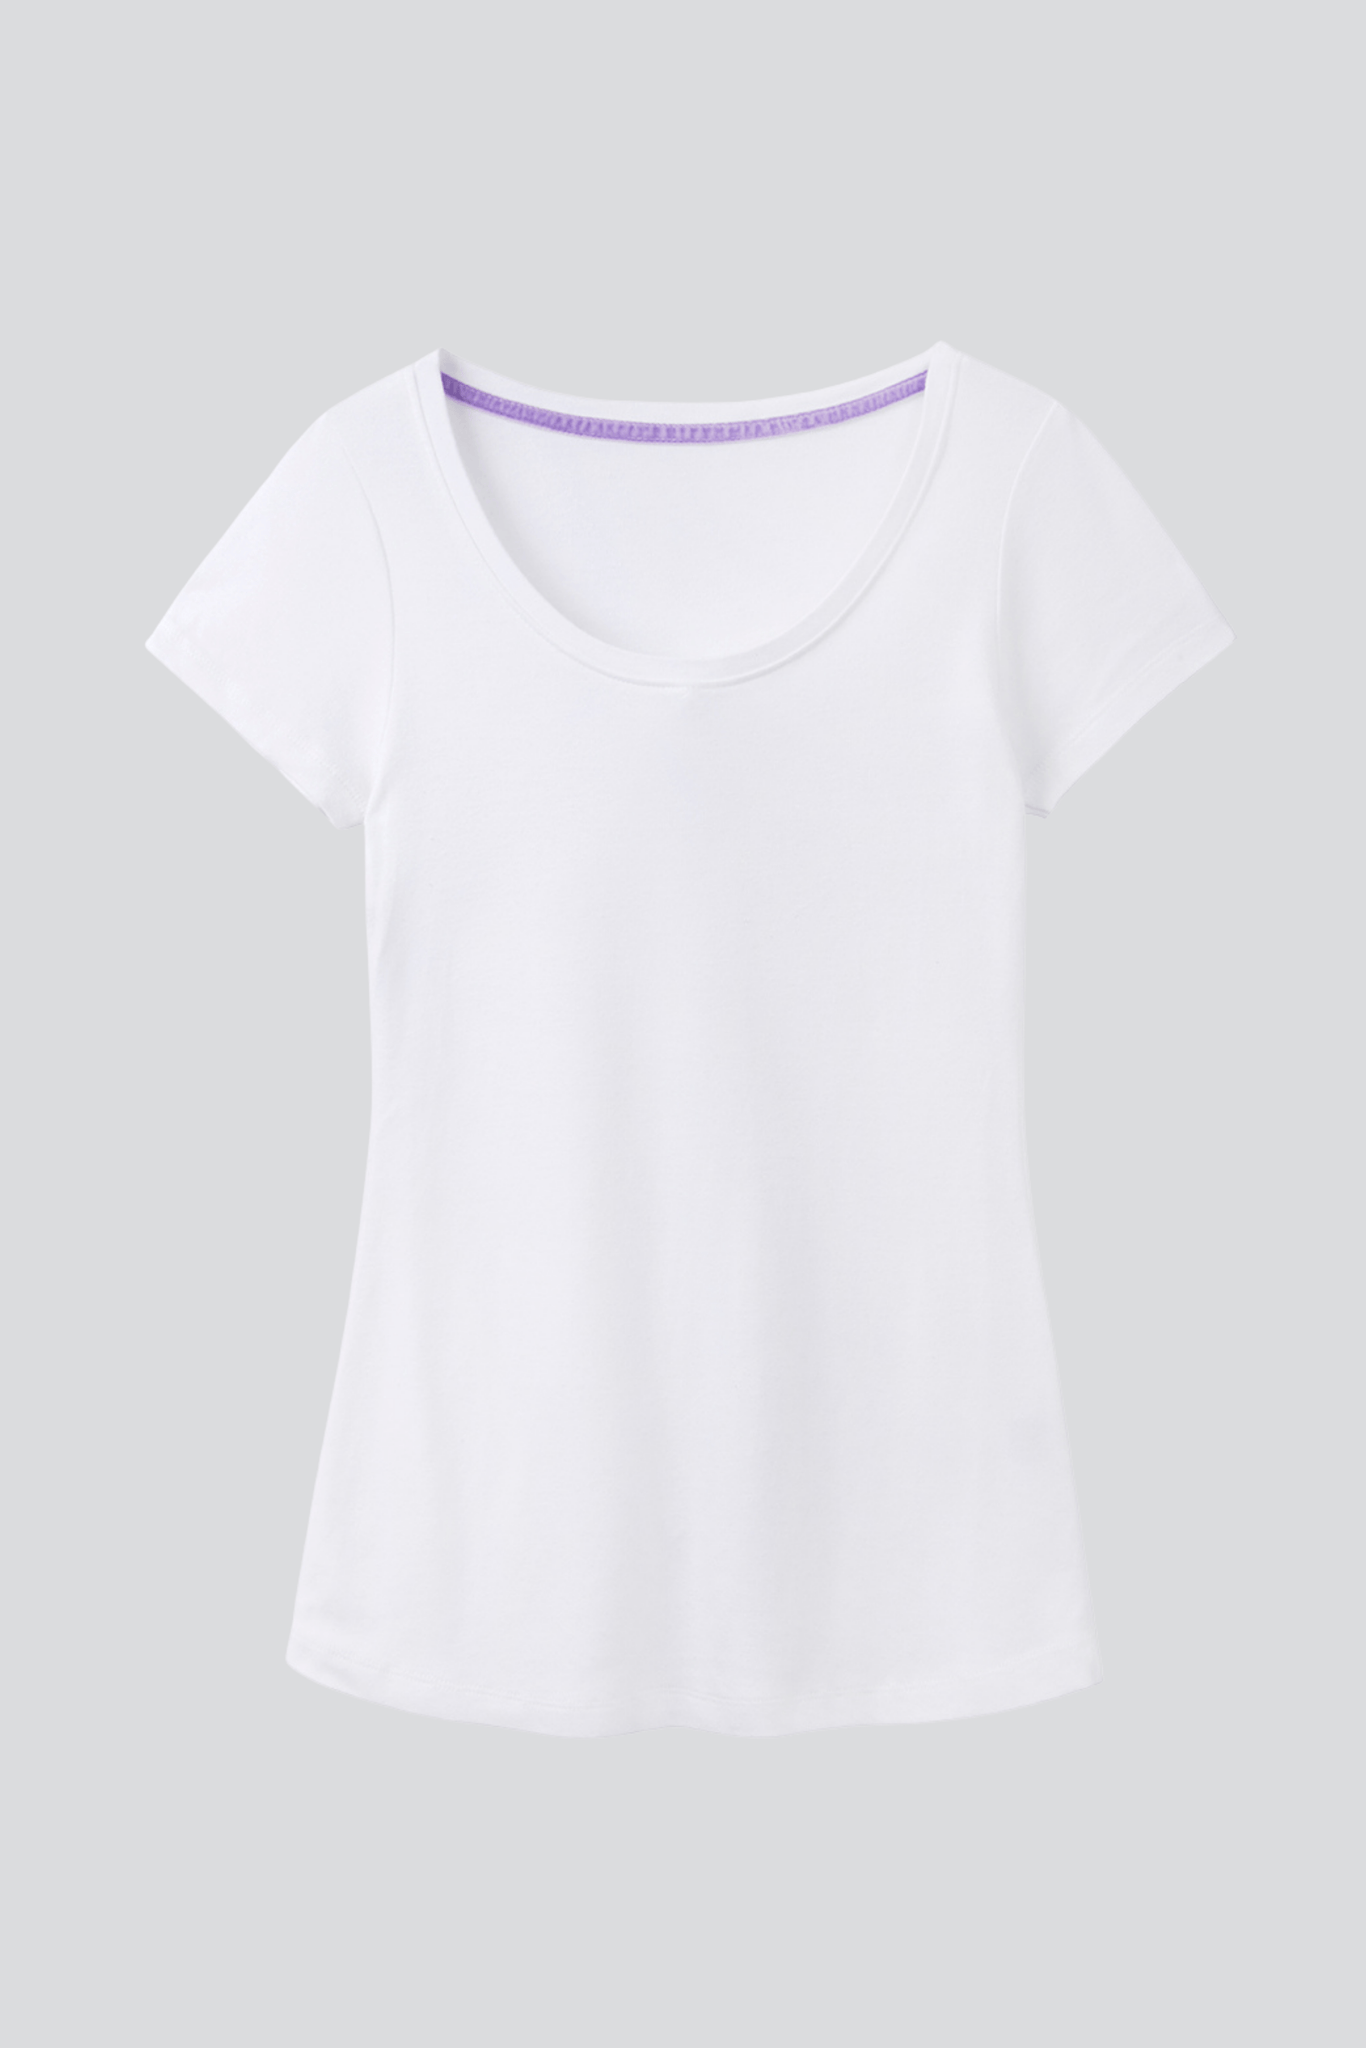 Women's Quality Scoop Neck Cotton Modal Blend T-shirt in White - Short Sleeve T-shirt by Lavender Hill Clothing